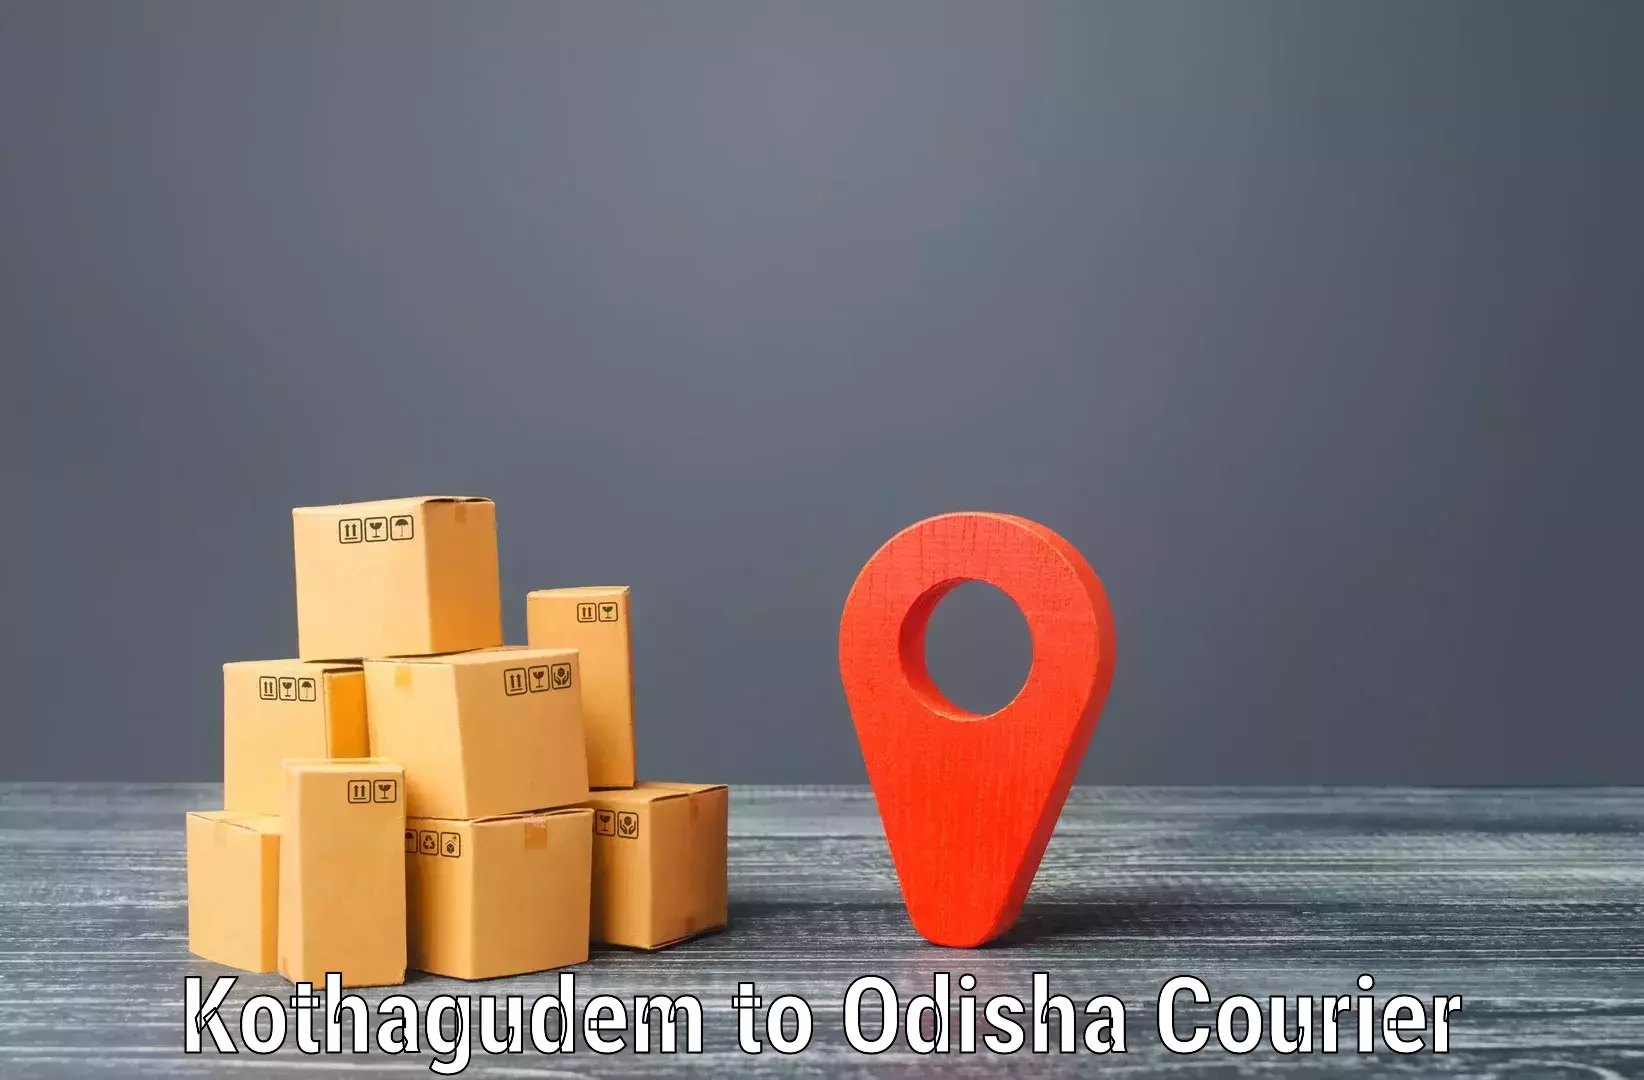 Express delivery capabilities in Kothagudem to Jashipur